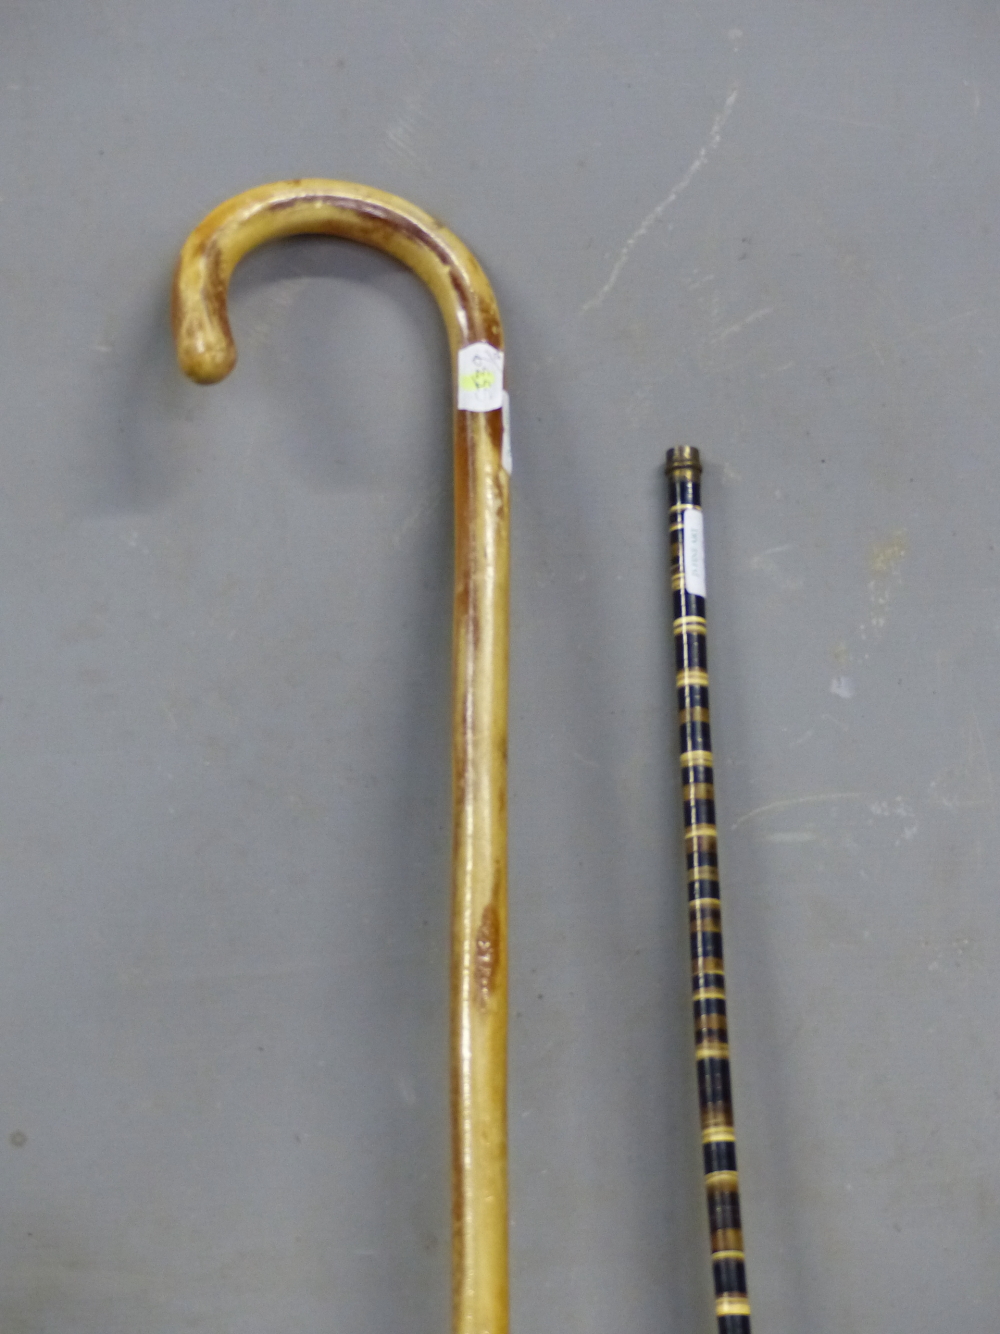 A HORN WALKING STICK OF AMBER HUE TOGETHER WITH A WALKING CANE FORMED OF HORN IN BANDS OF COLOURS - Image 4 of 9